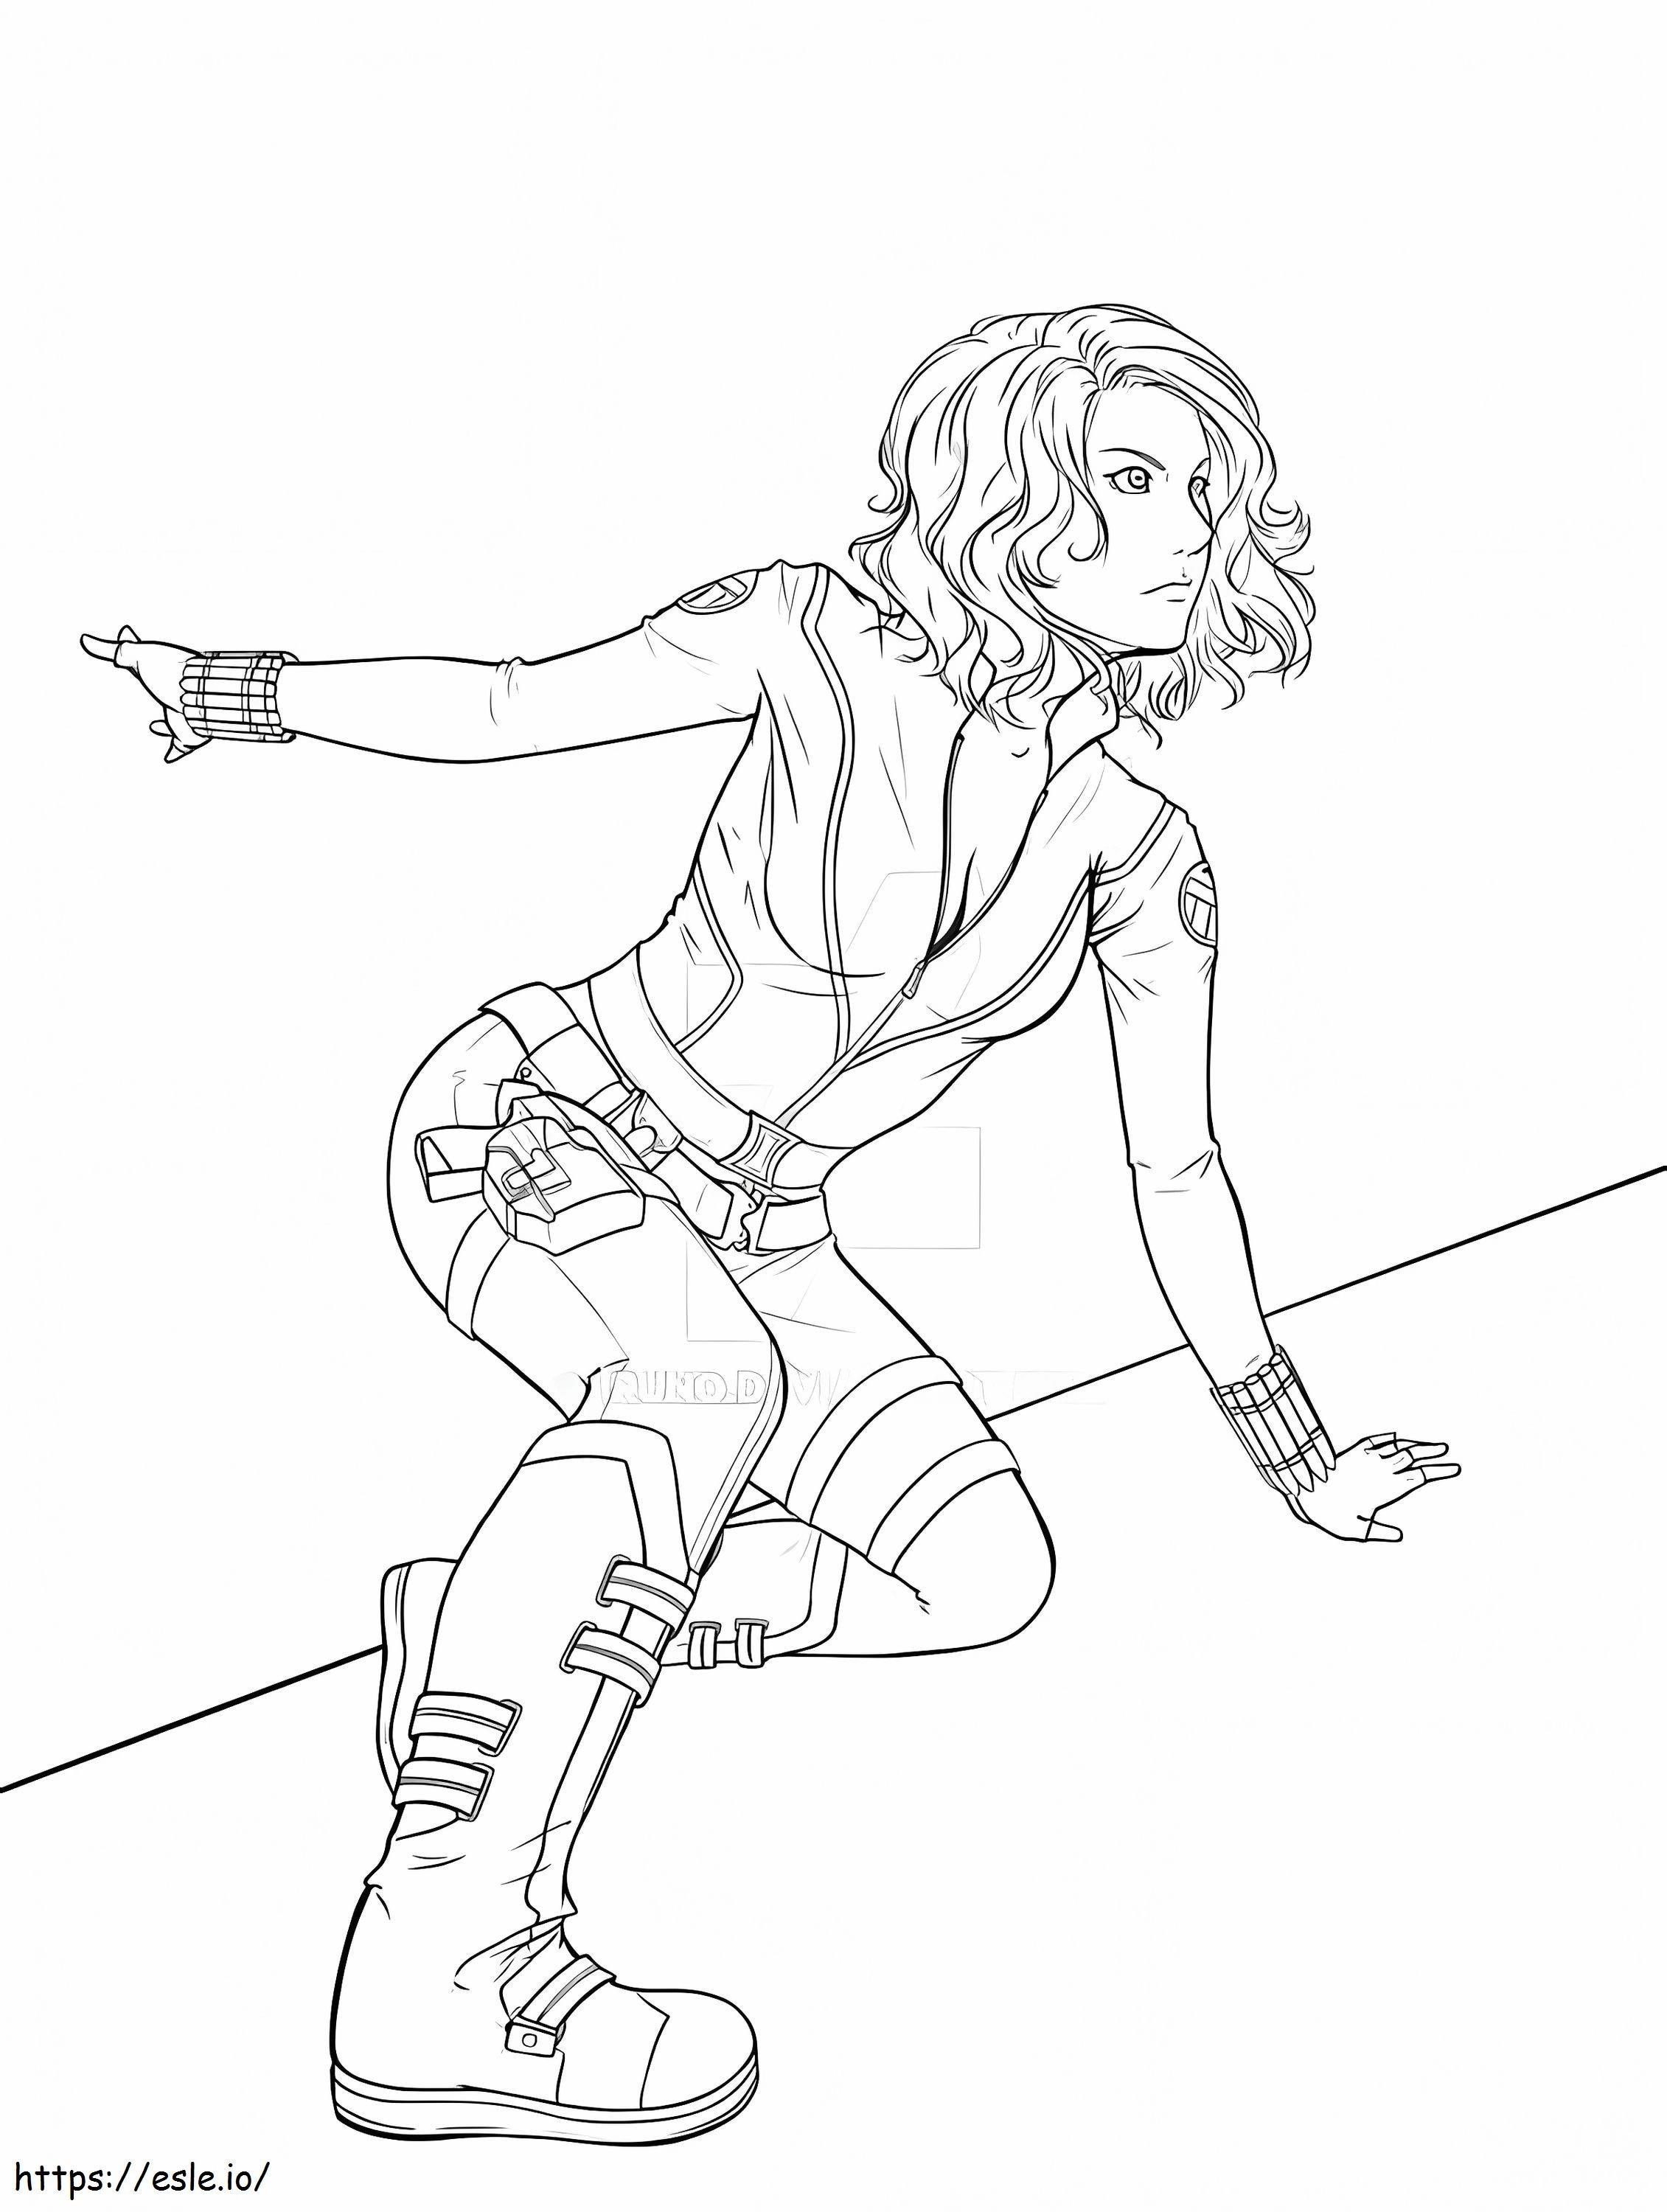 Black Widow 14 coloring page